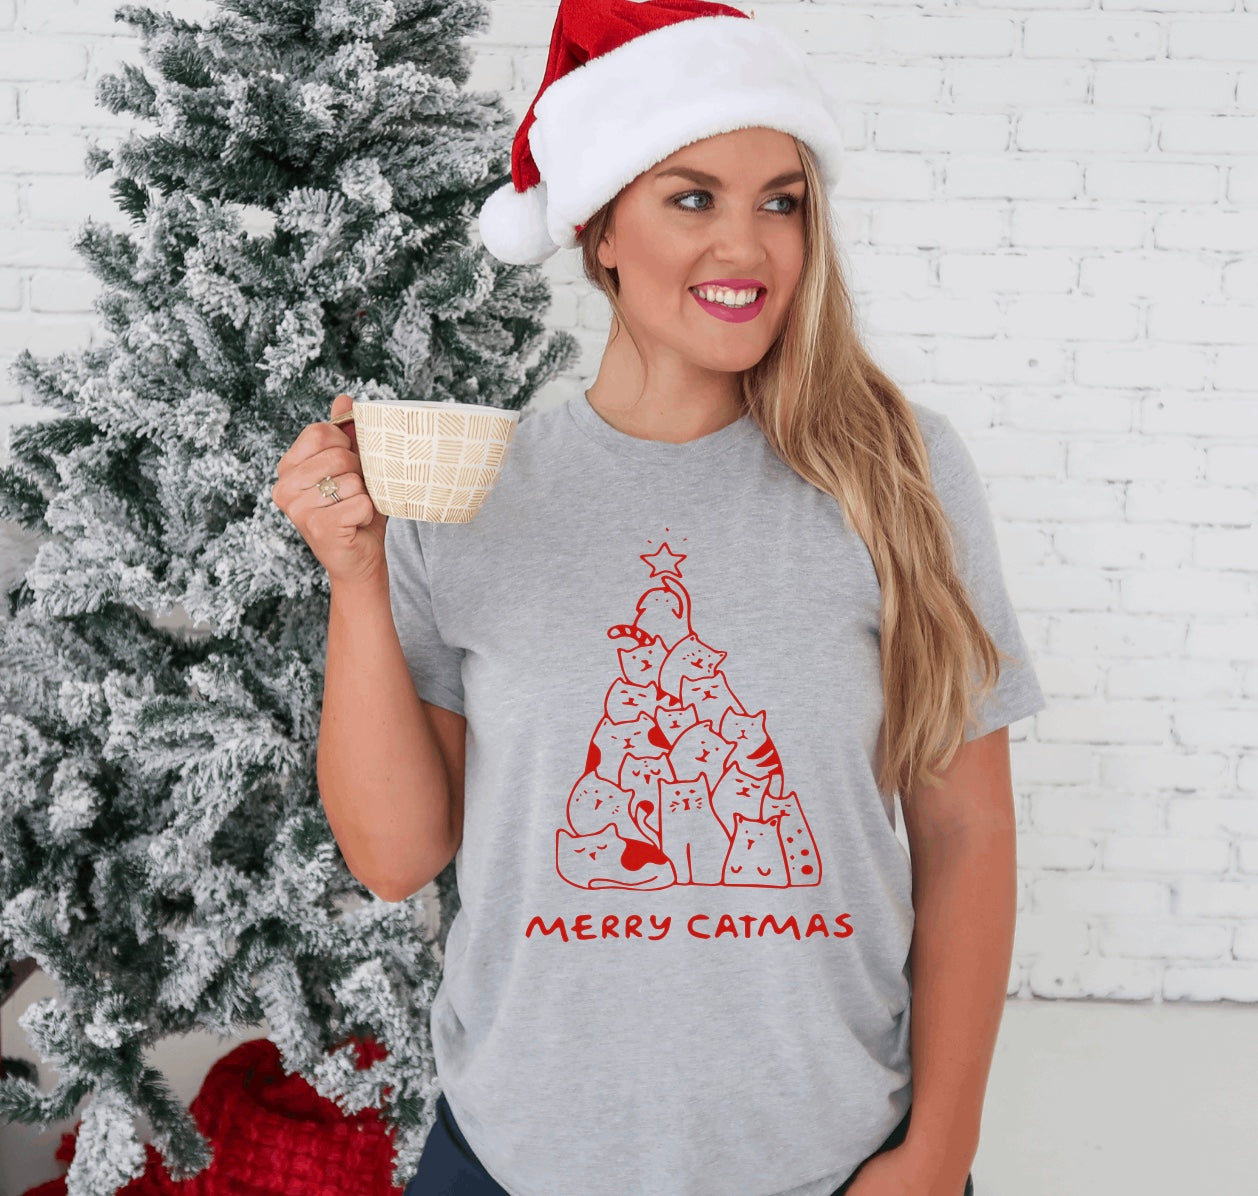 merry catmas Christmas t-shirt for cat lovers in grey